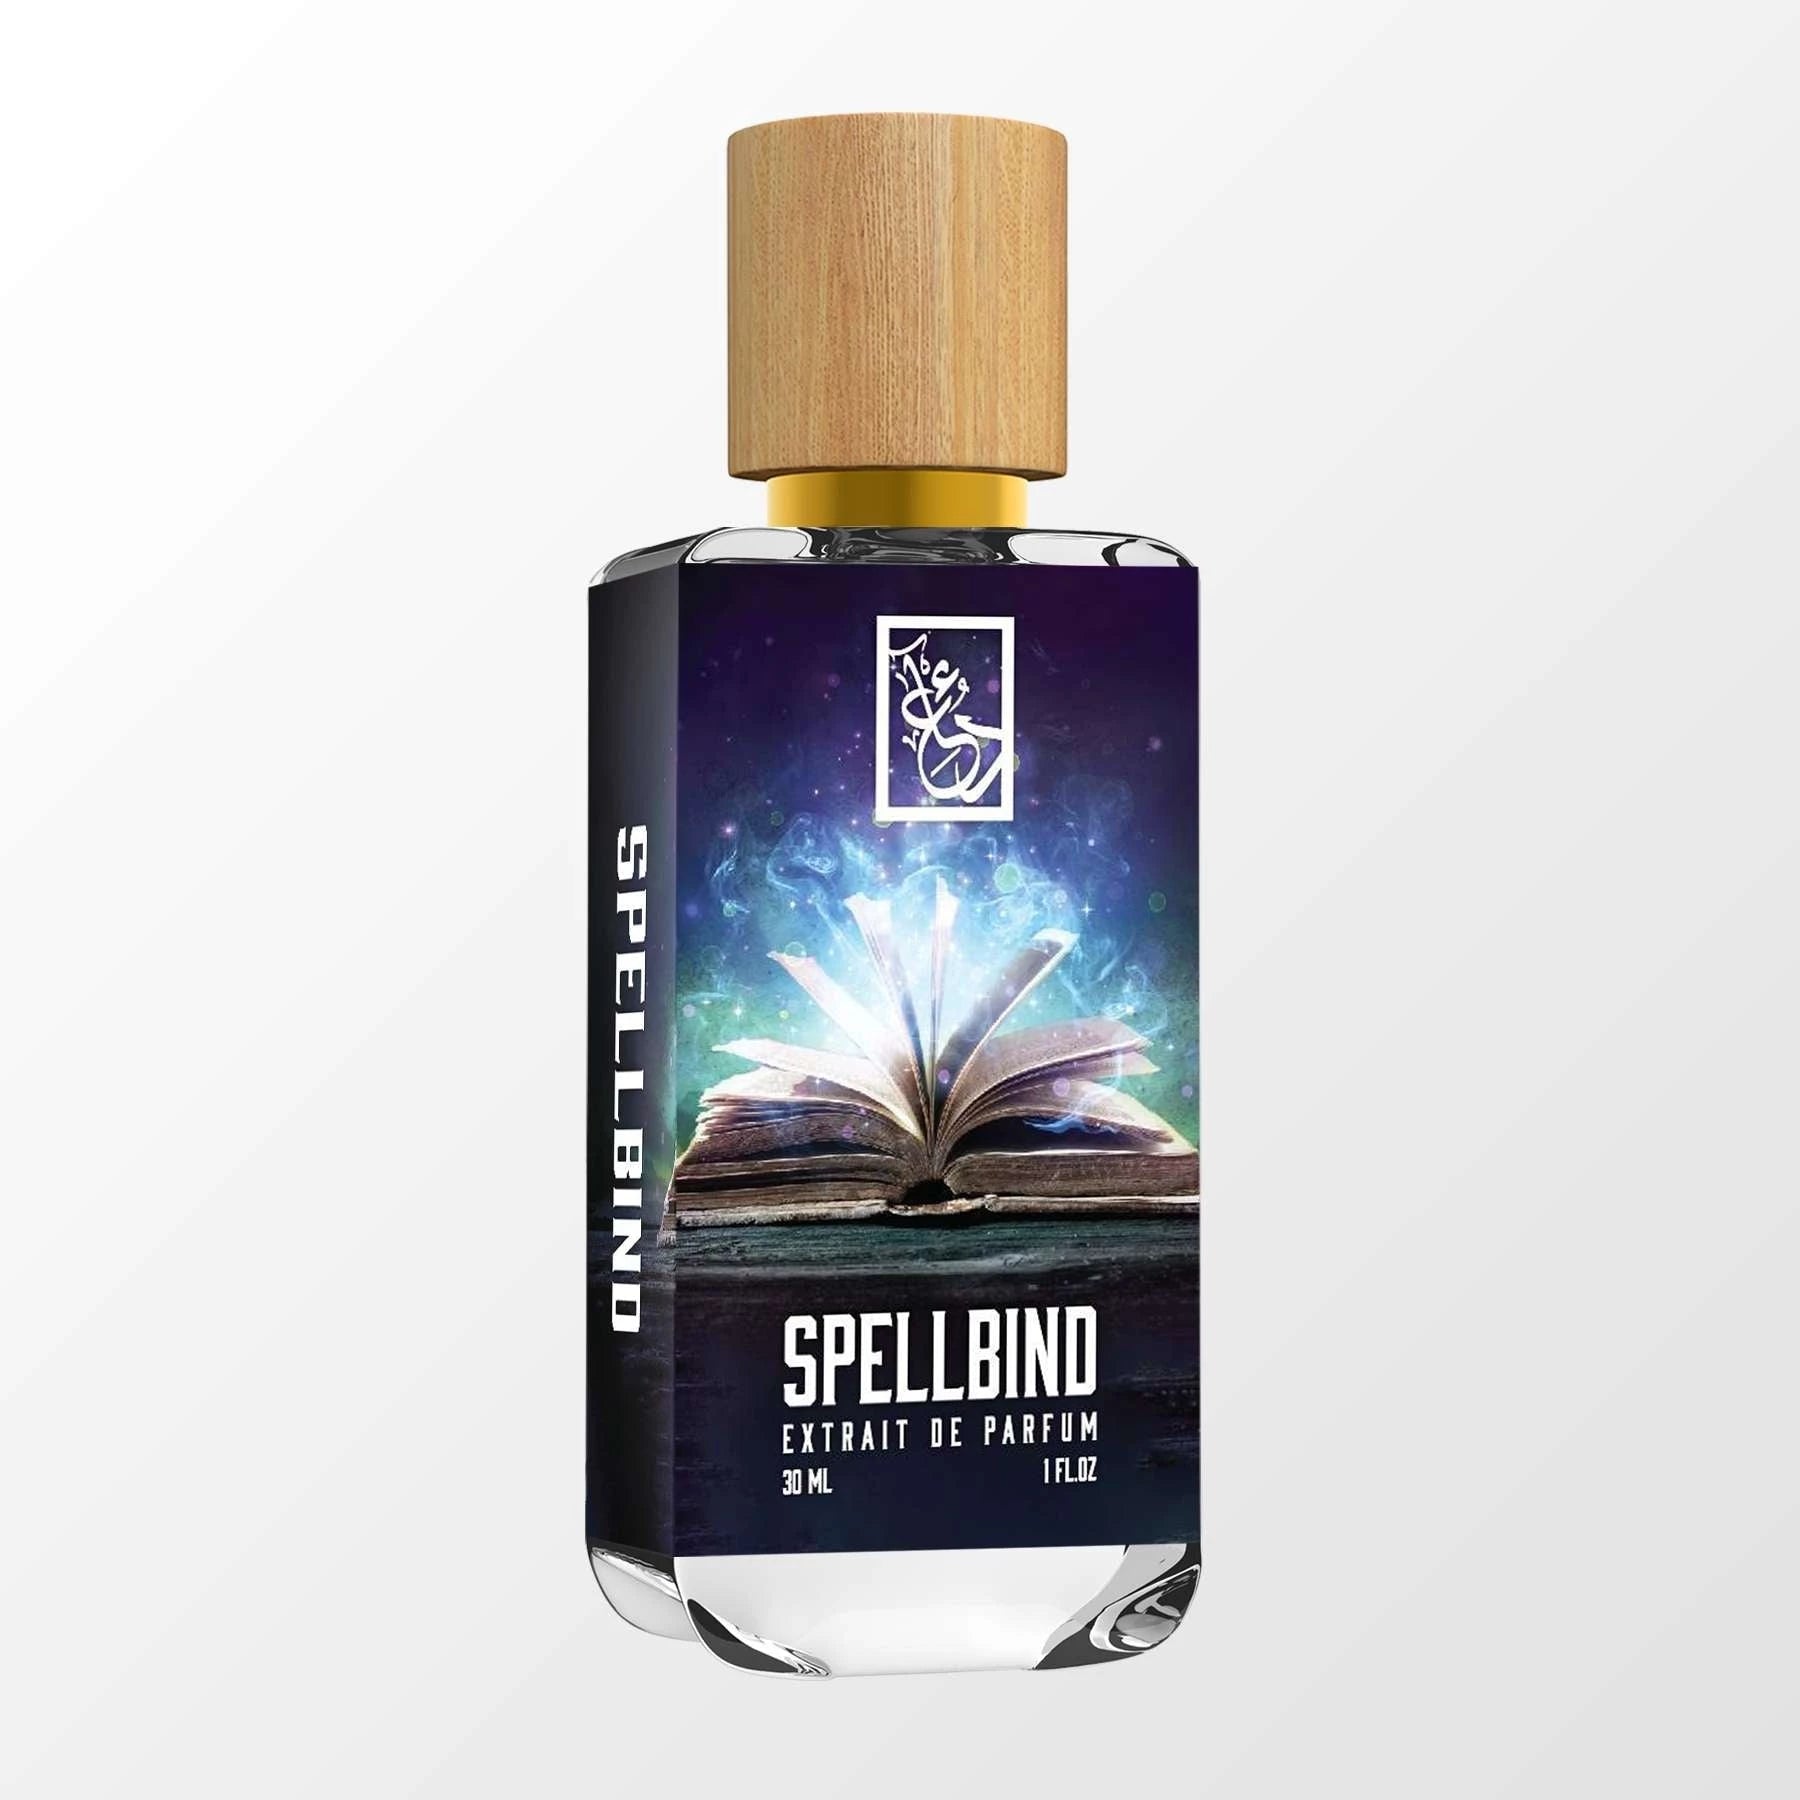 Spellbind - DUA FRAGRANCES - Inspired by Spell on You Louis